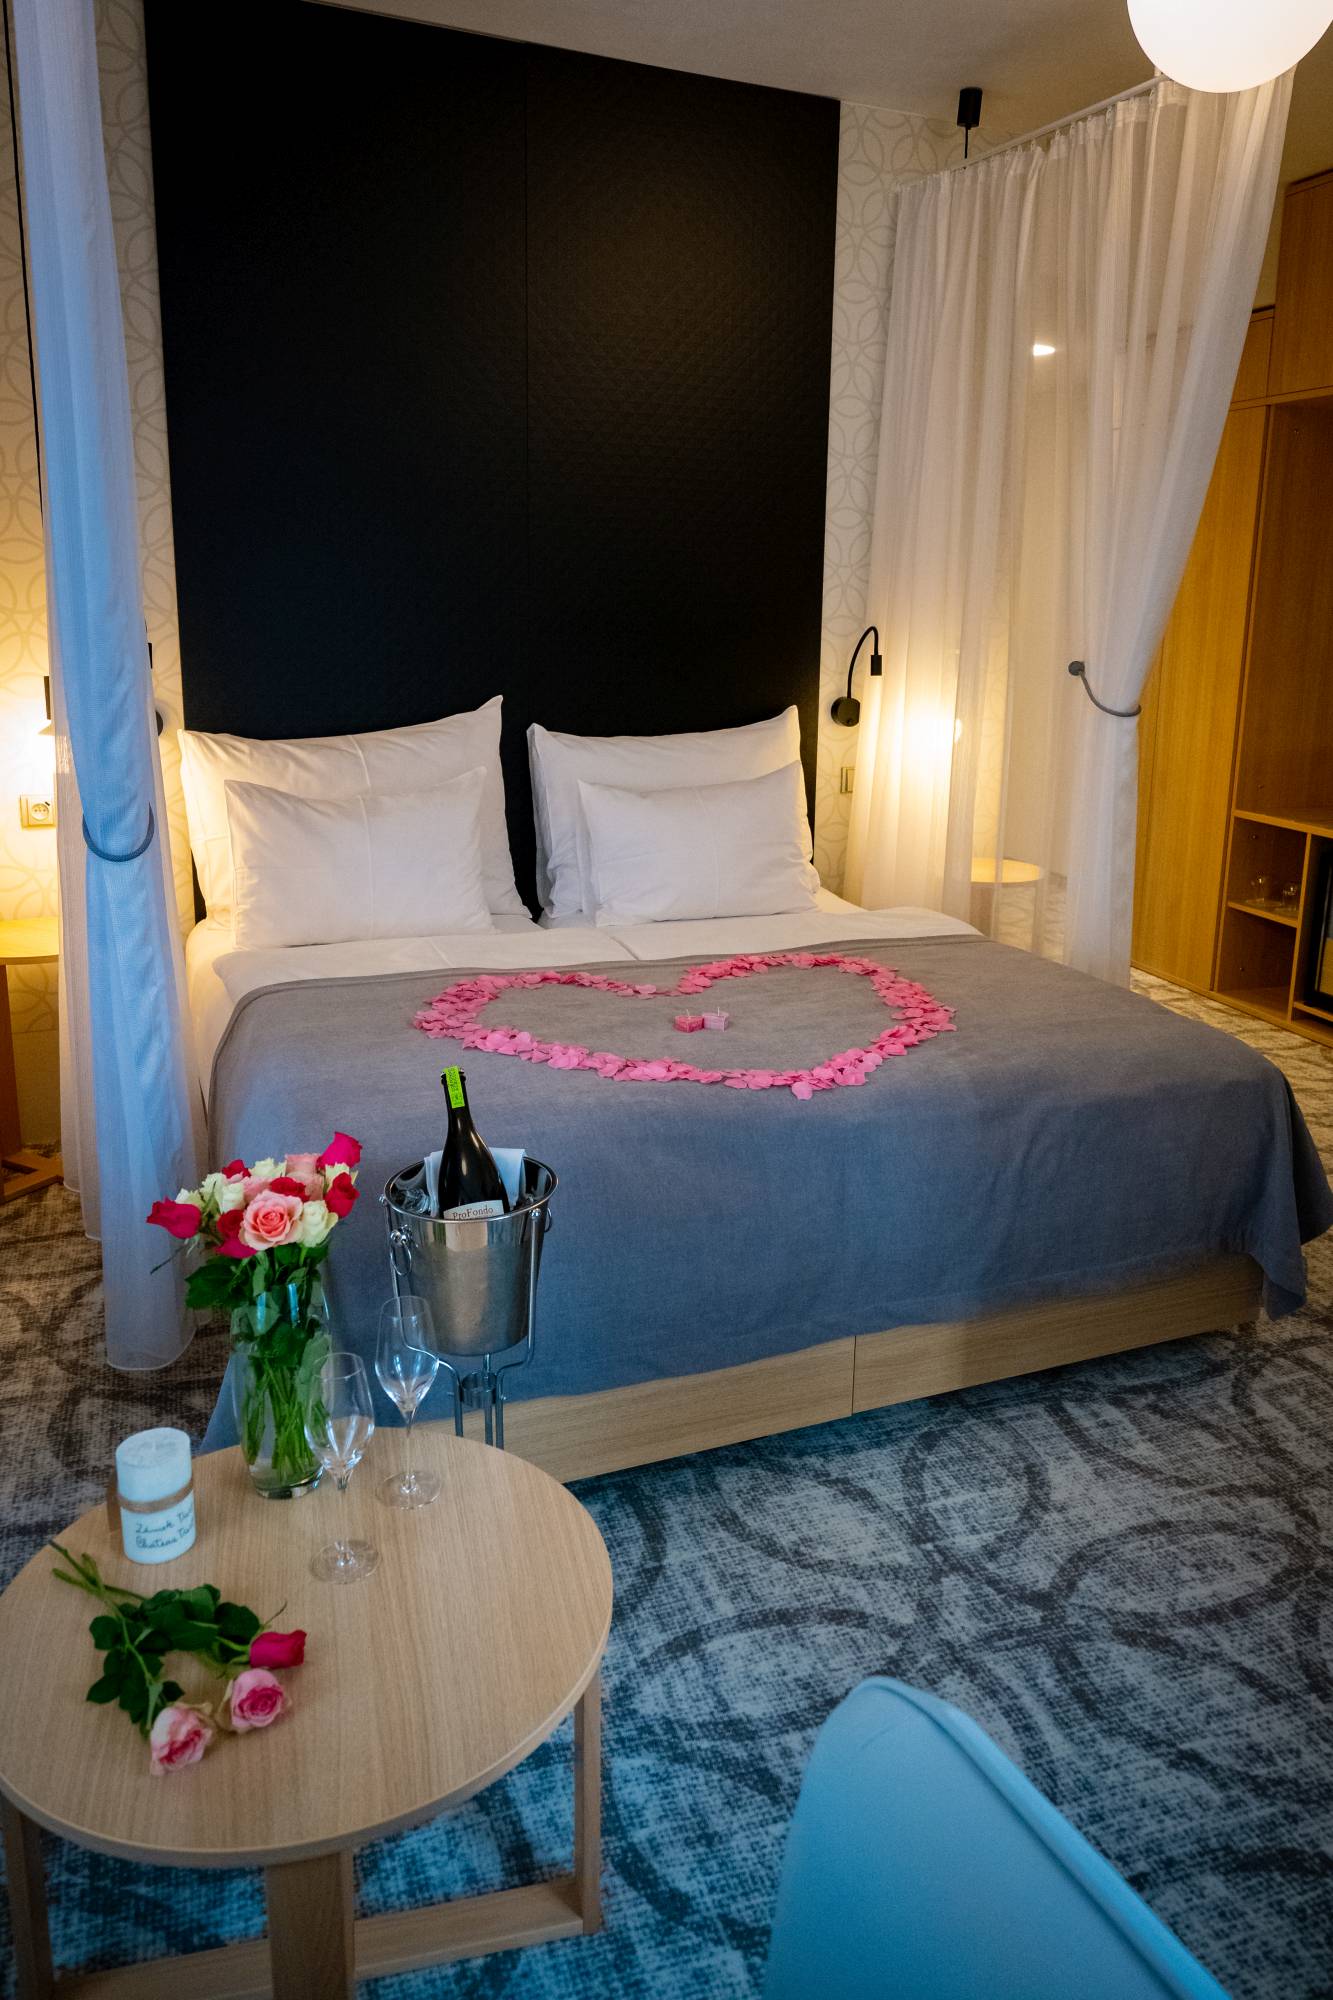 Romantic Stay – A Four-Poster Bed Full Of Roses